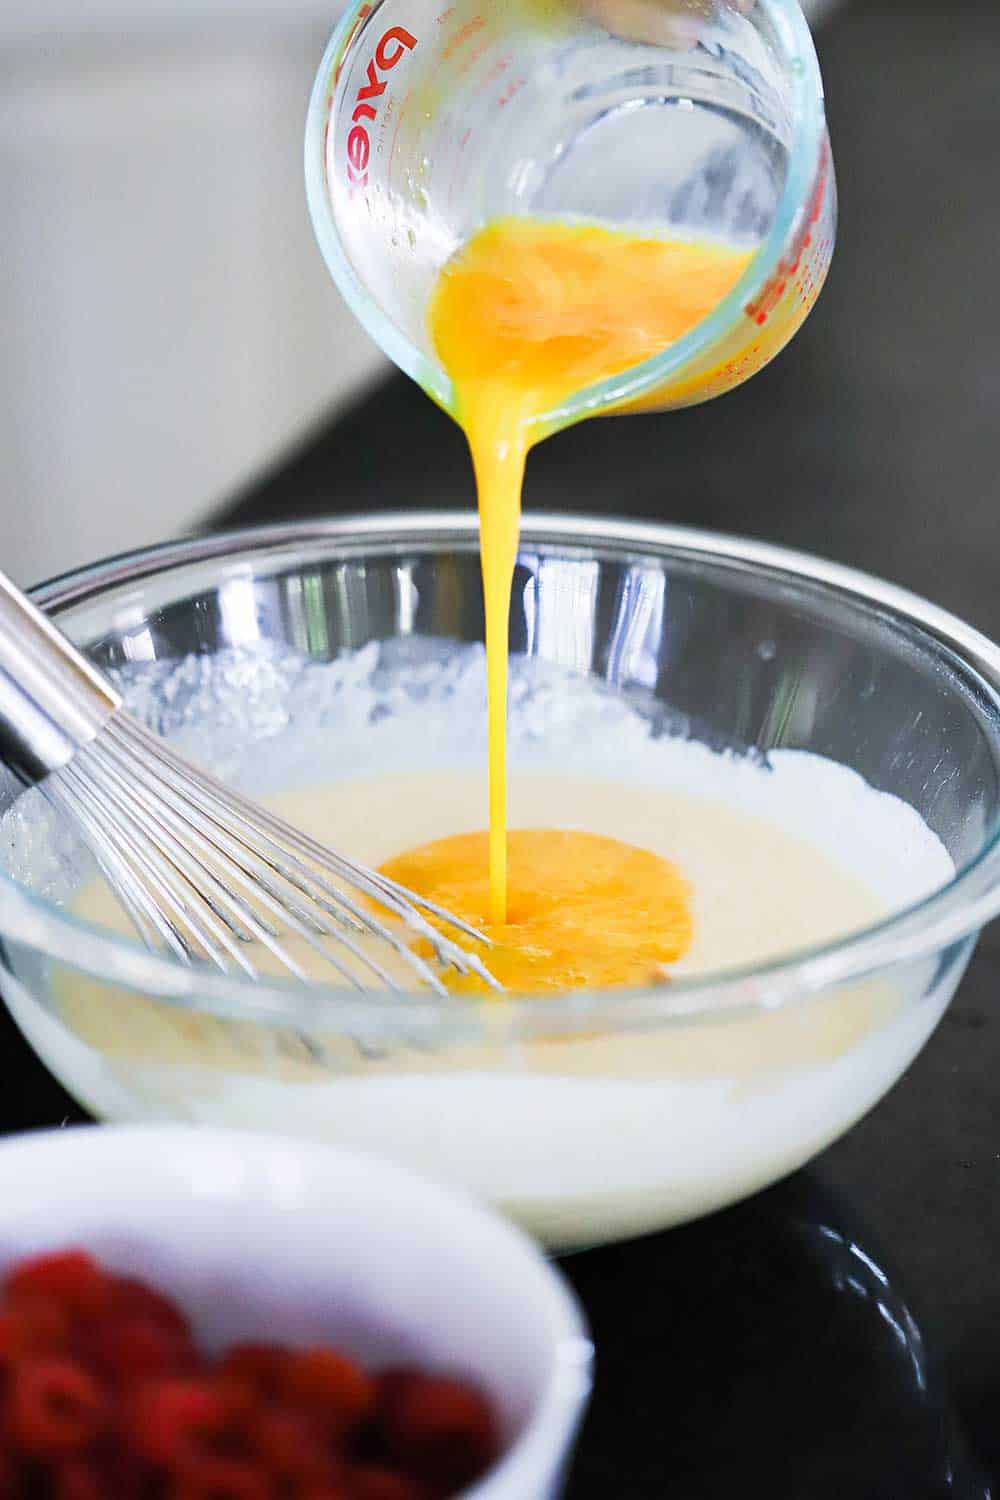 Beaten eggs being poured from a measuring cup into a bowl of white colored batter.